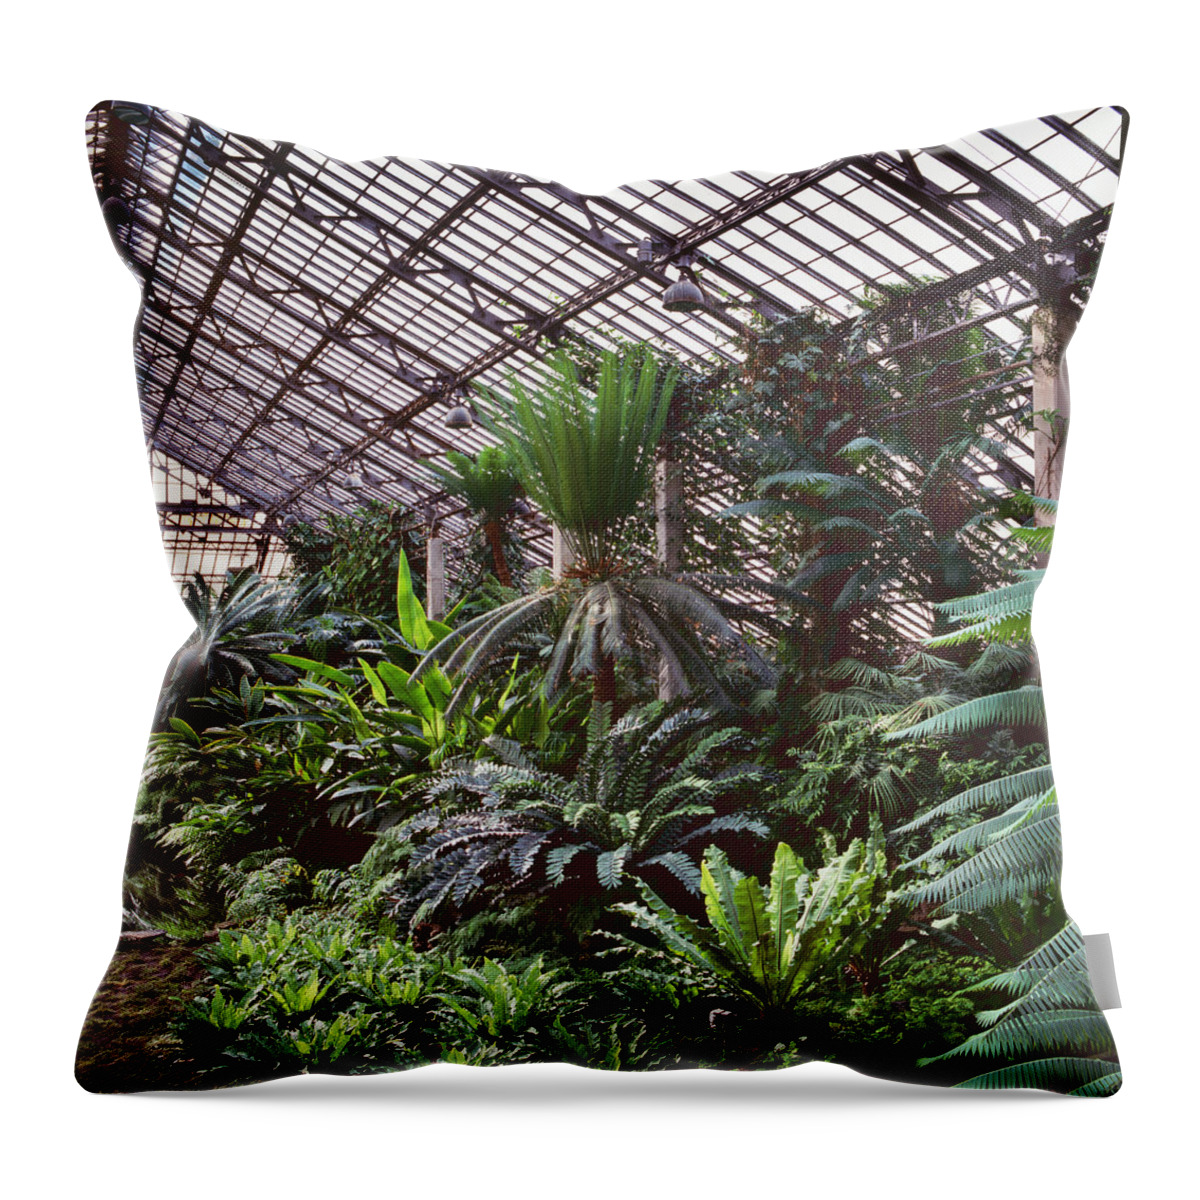 Tropical Climate Throw Pillow featuring the photograph Jen Jenson Conservatory by Richard Felber